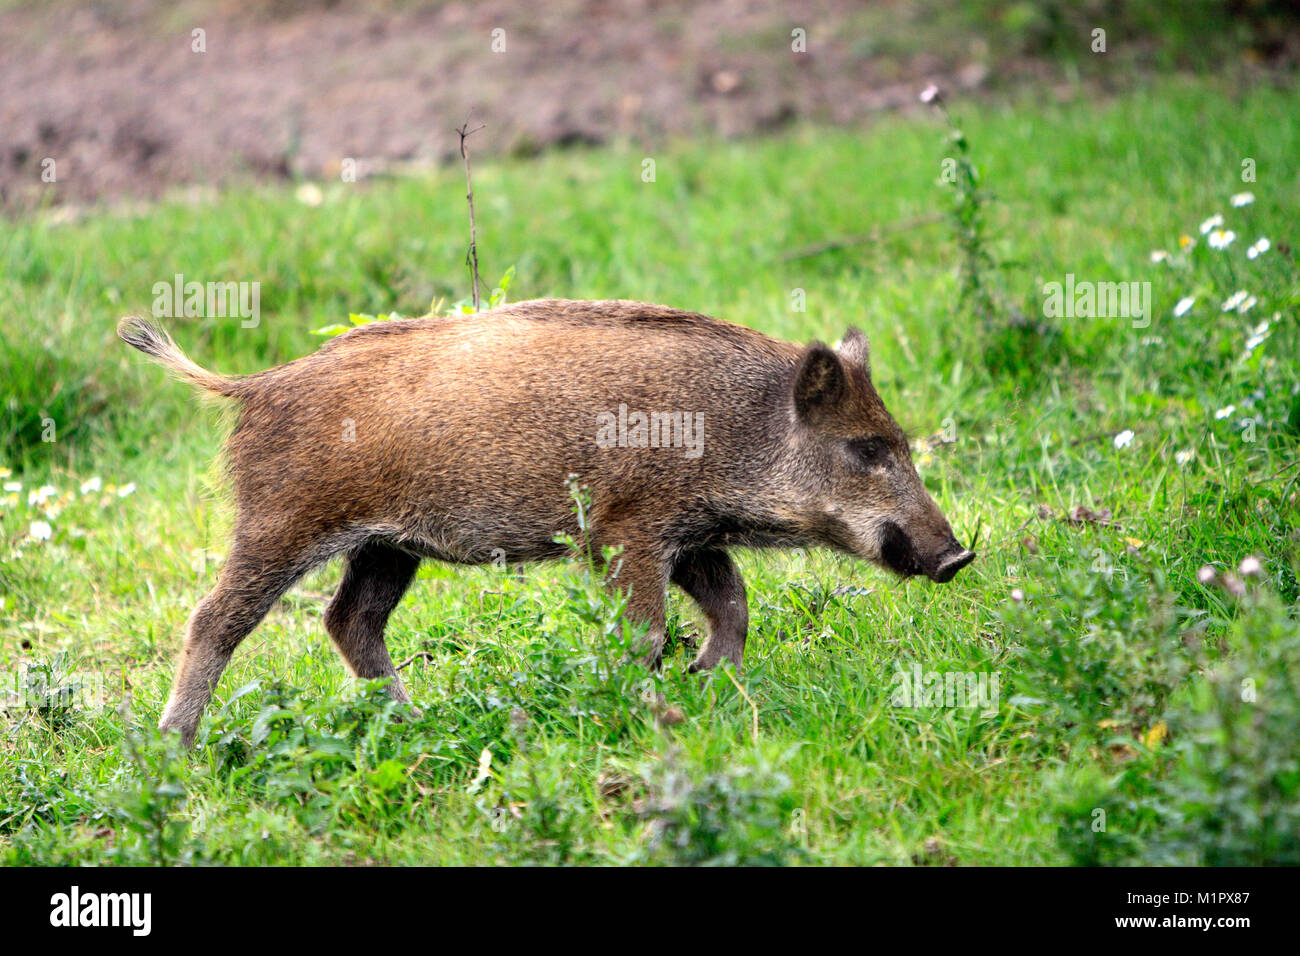 Single juvenile Wild boar in a forest during summer period Stock Photo